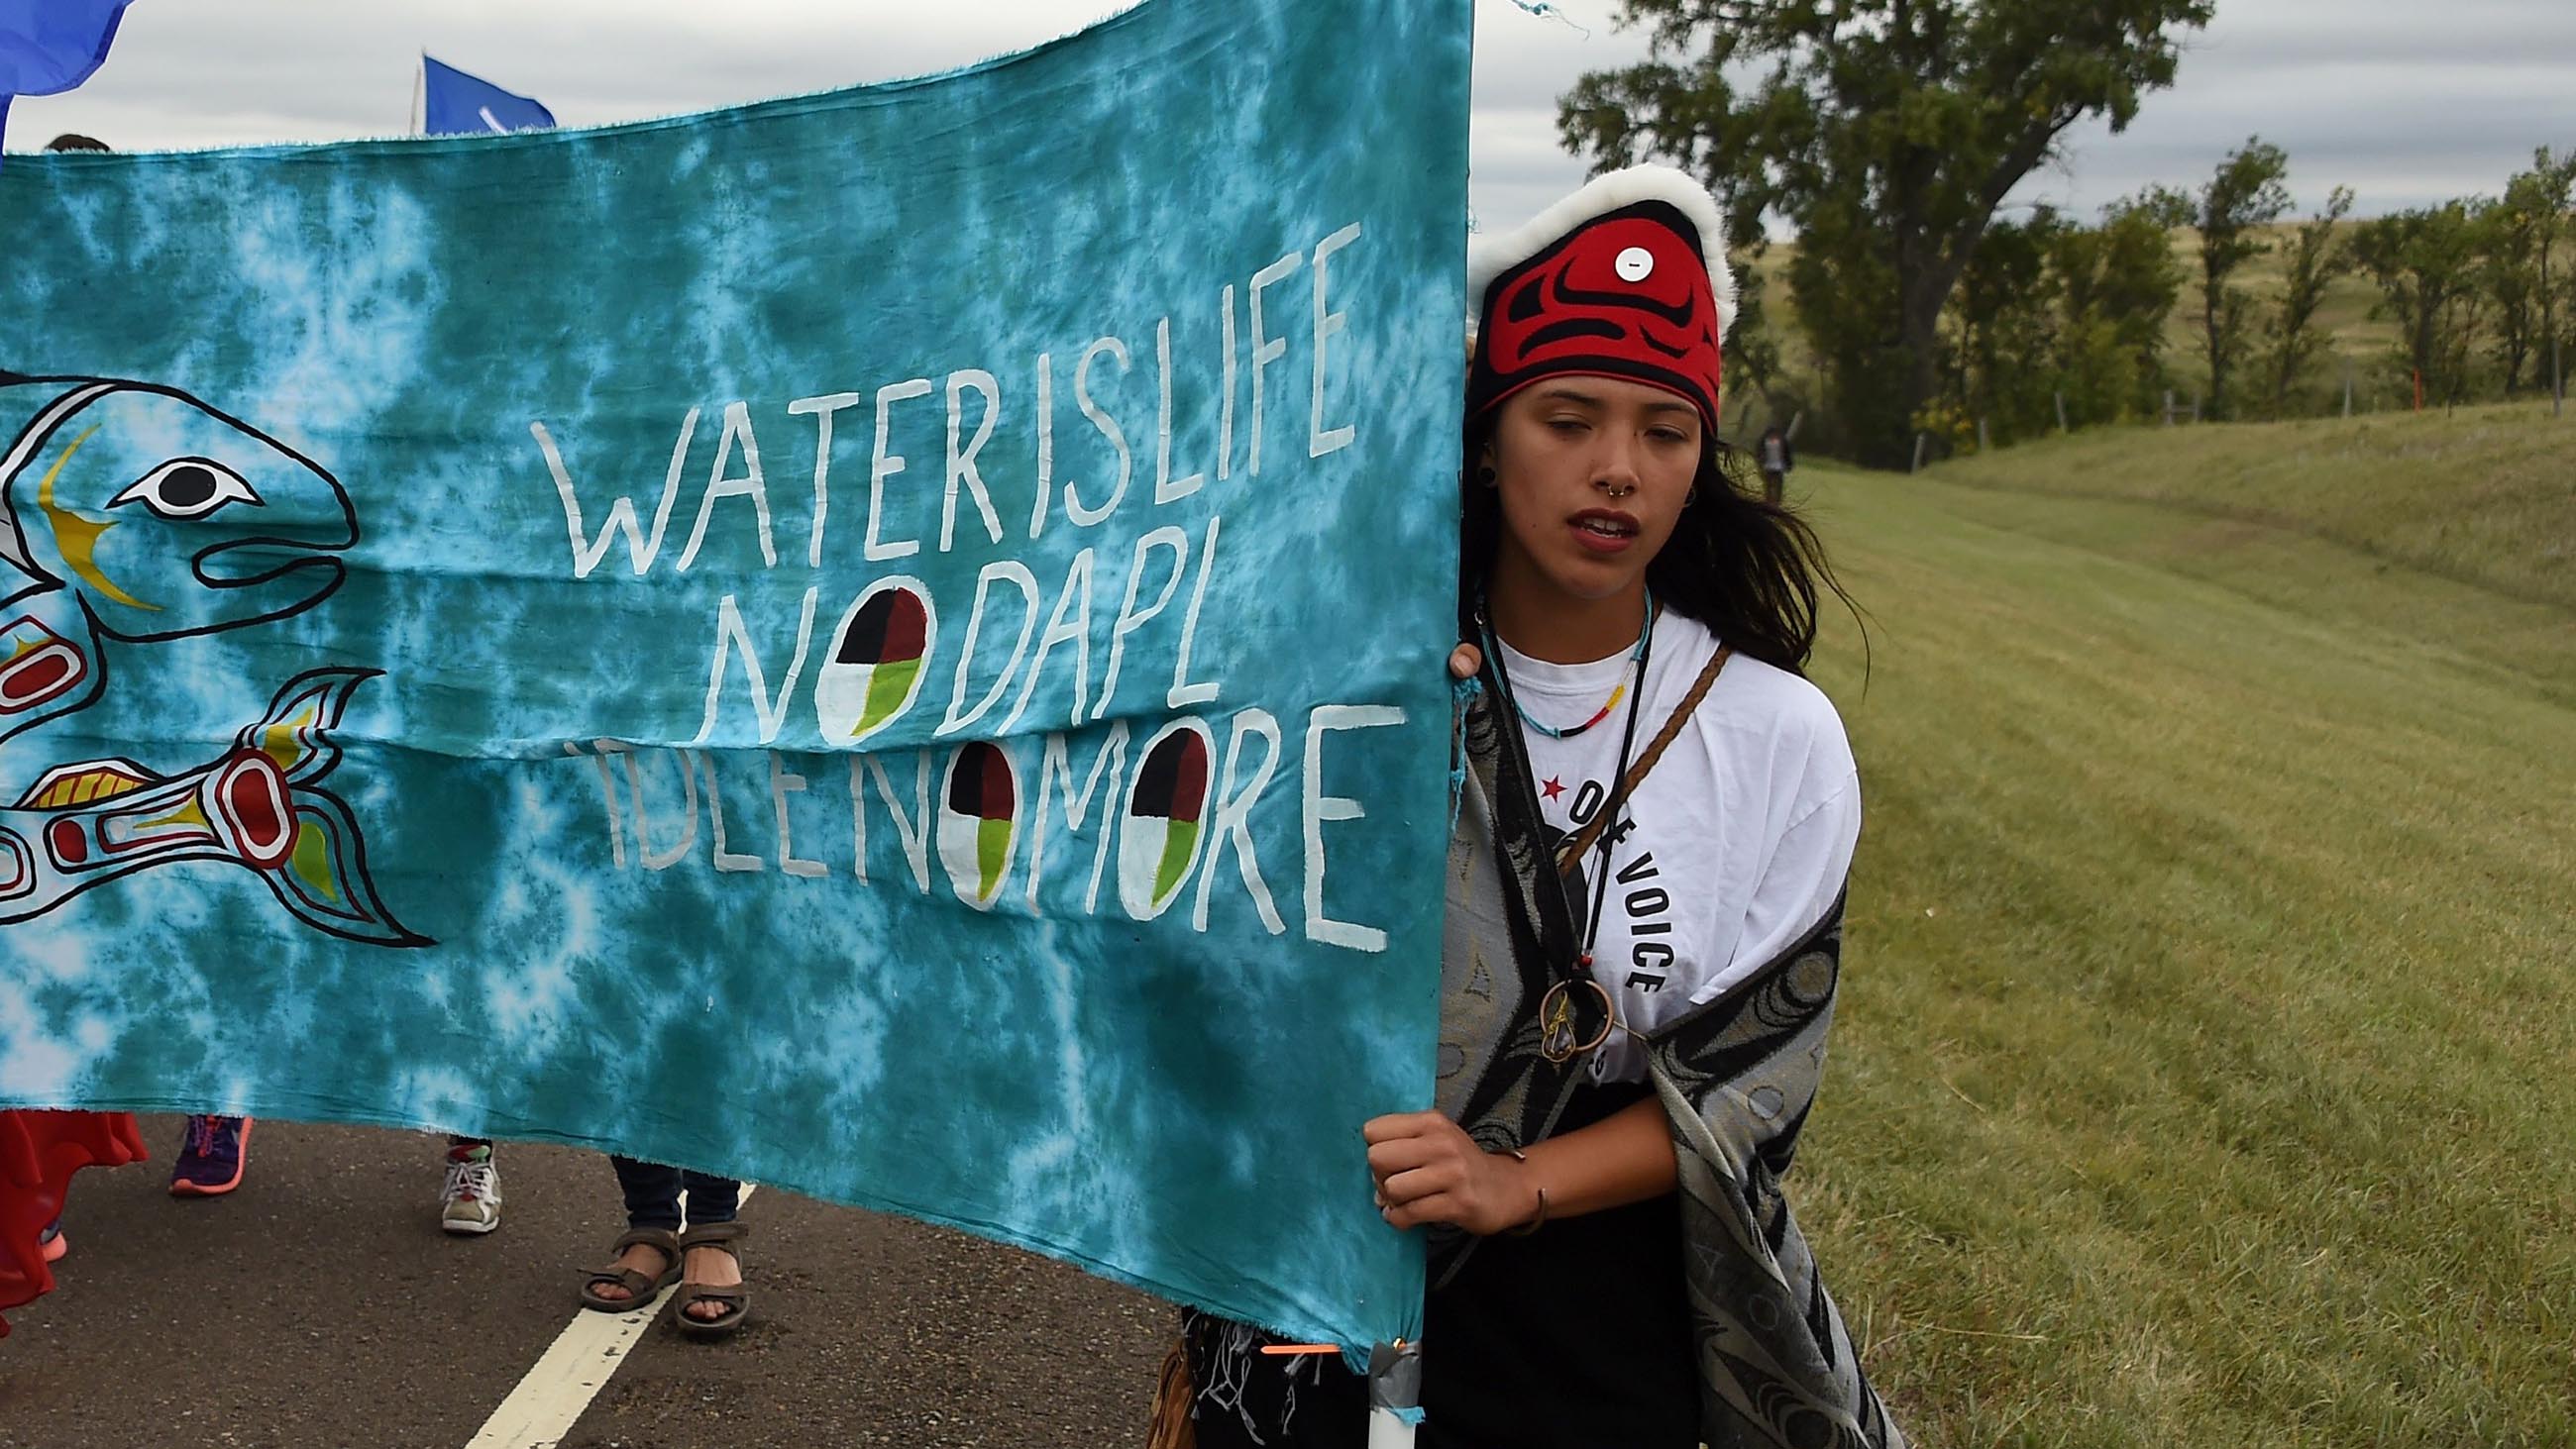 Native Americans and their supporters have blocked the Dakota Access Pipeline project -- fort now. But until we stop consuming oil, pipelines will proliferate.